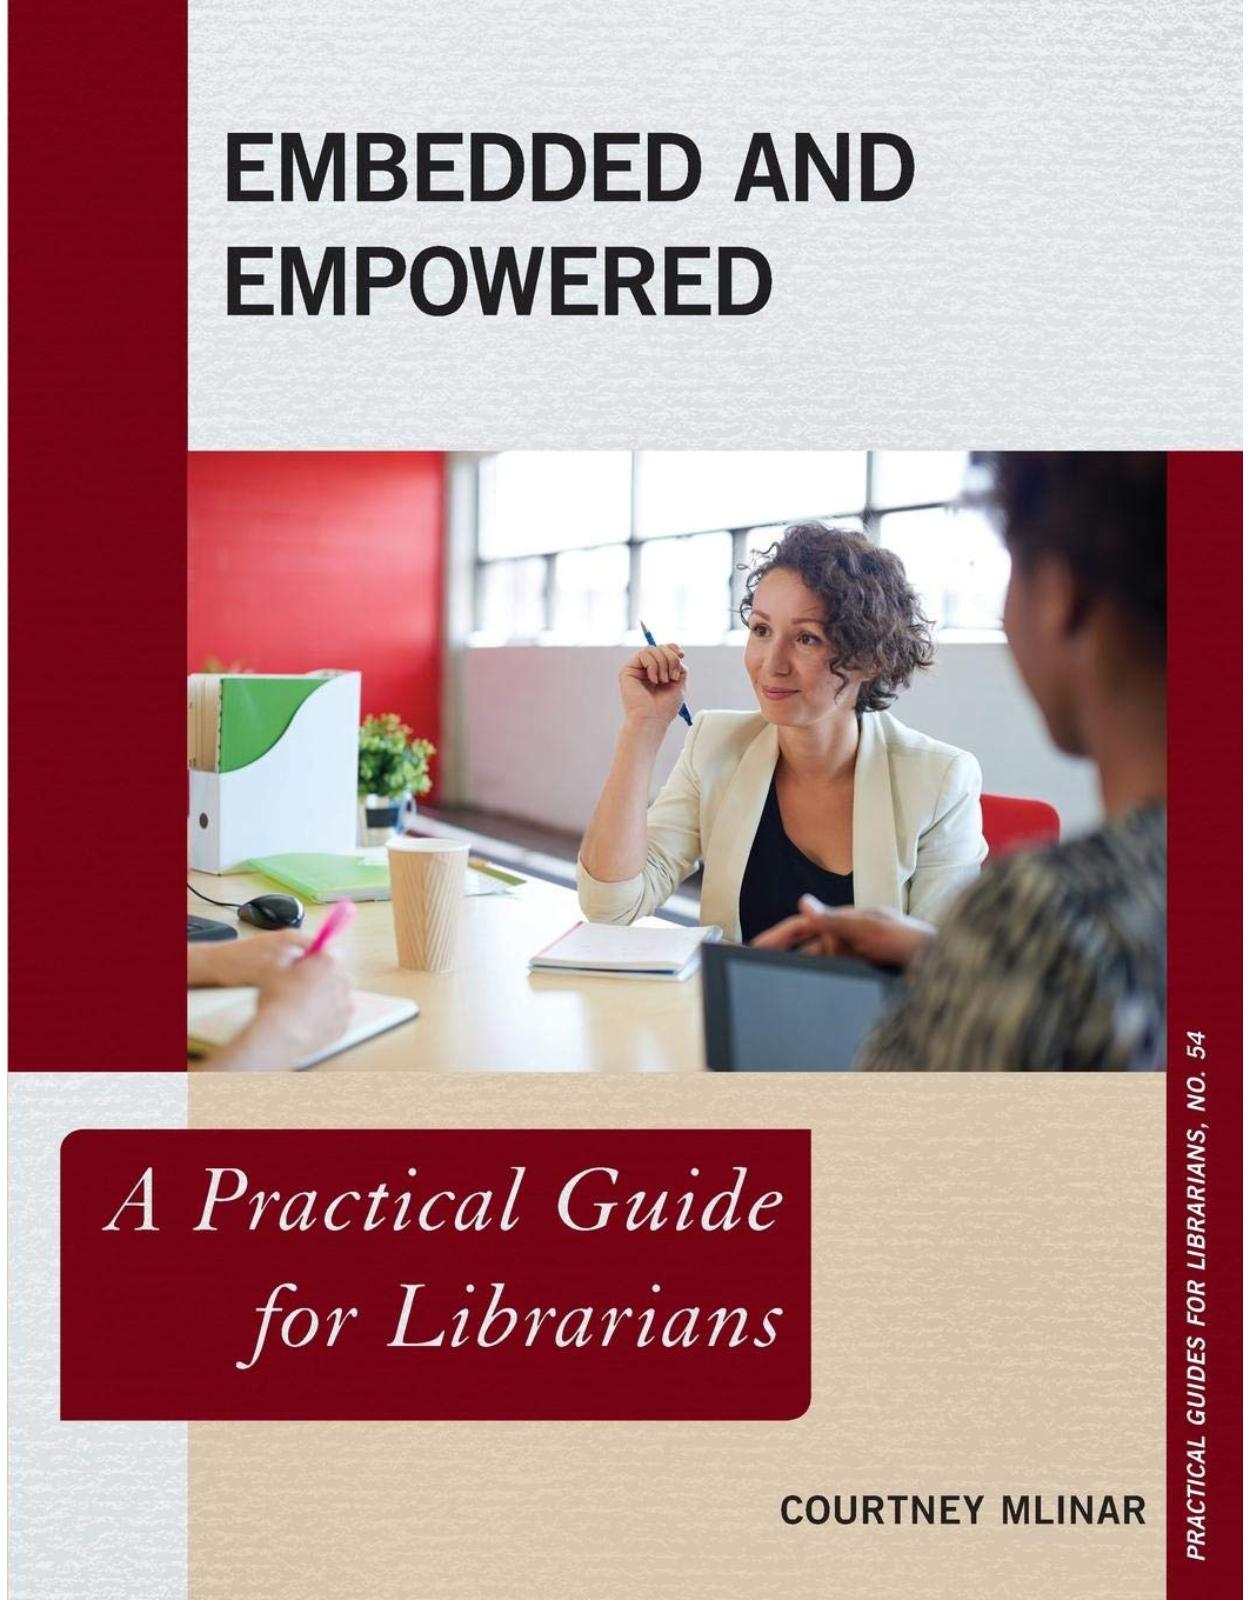 Embedded and Empowered. A Practical Guide for Librarians